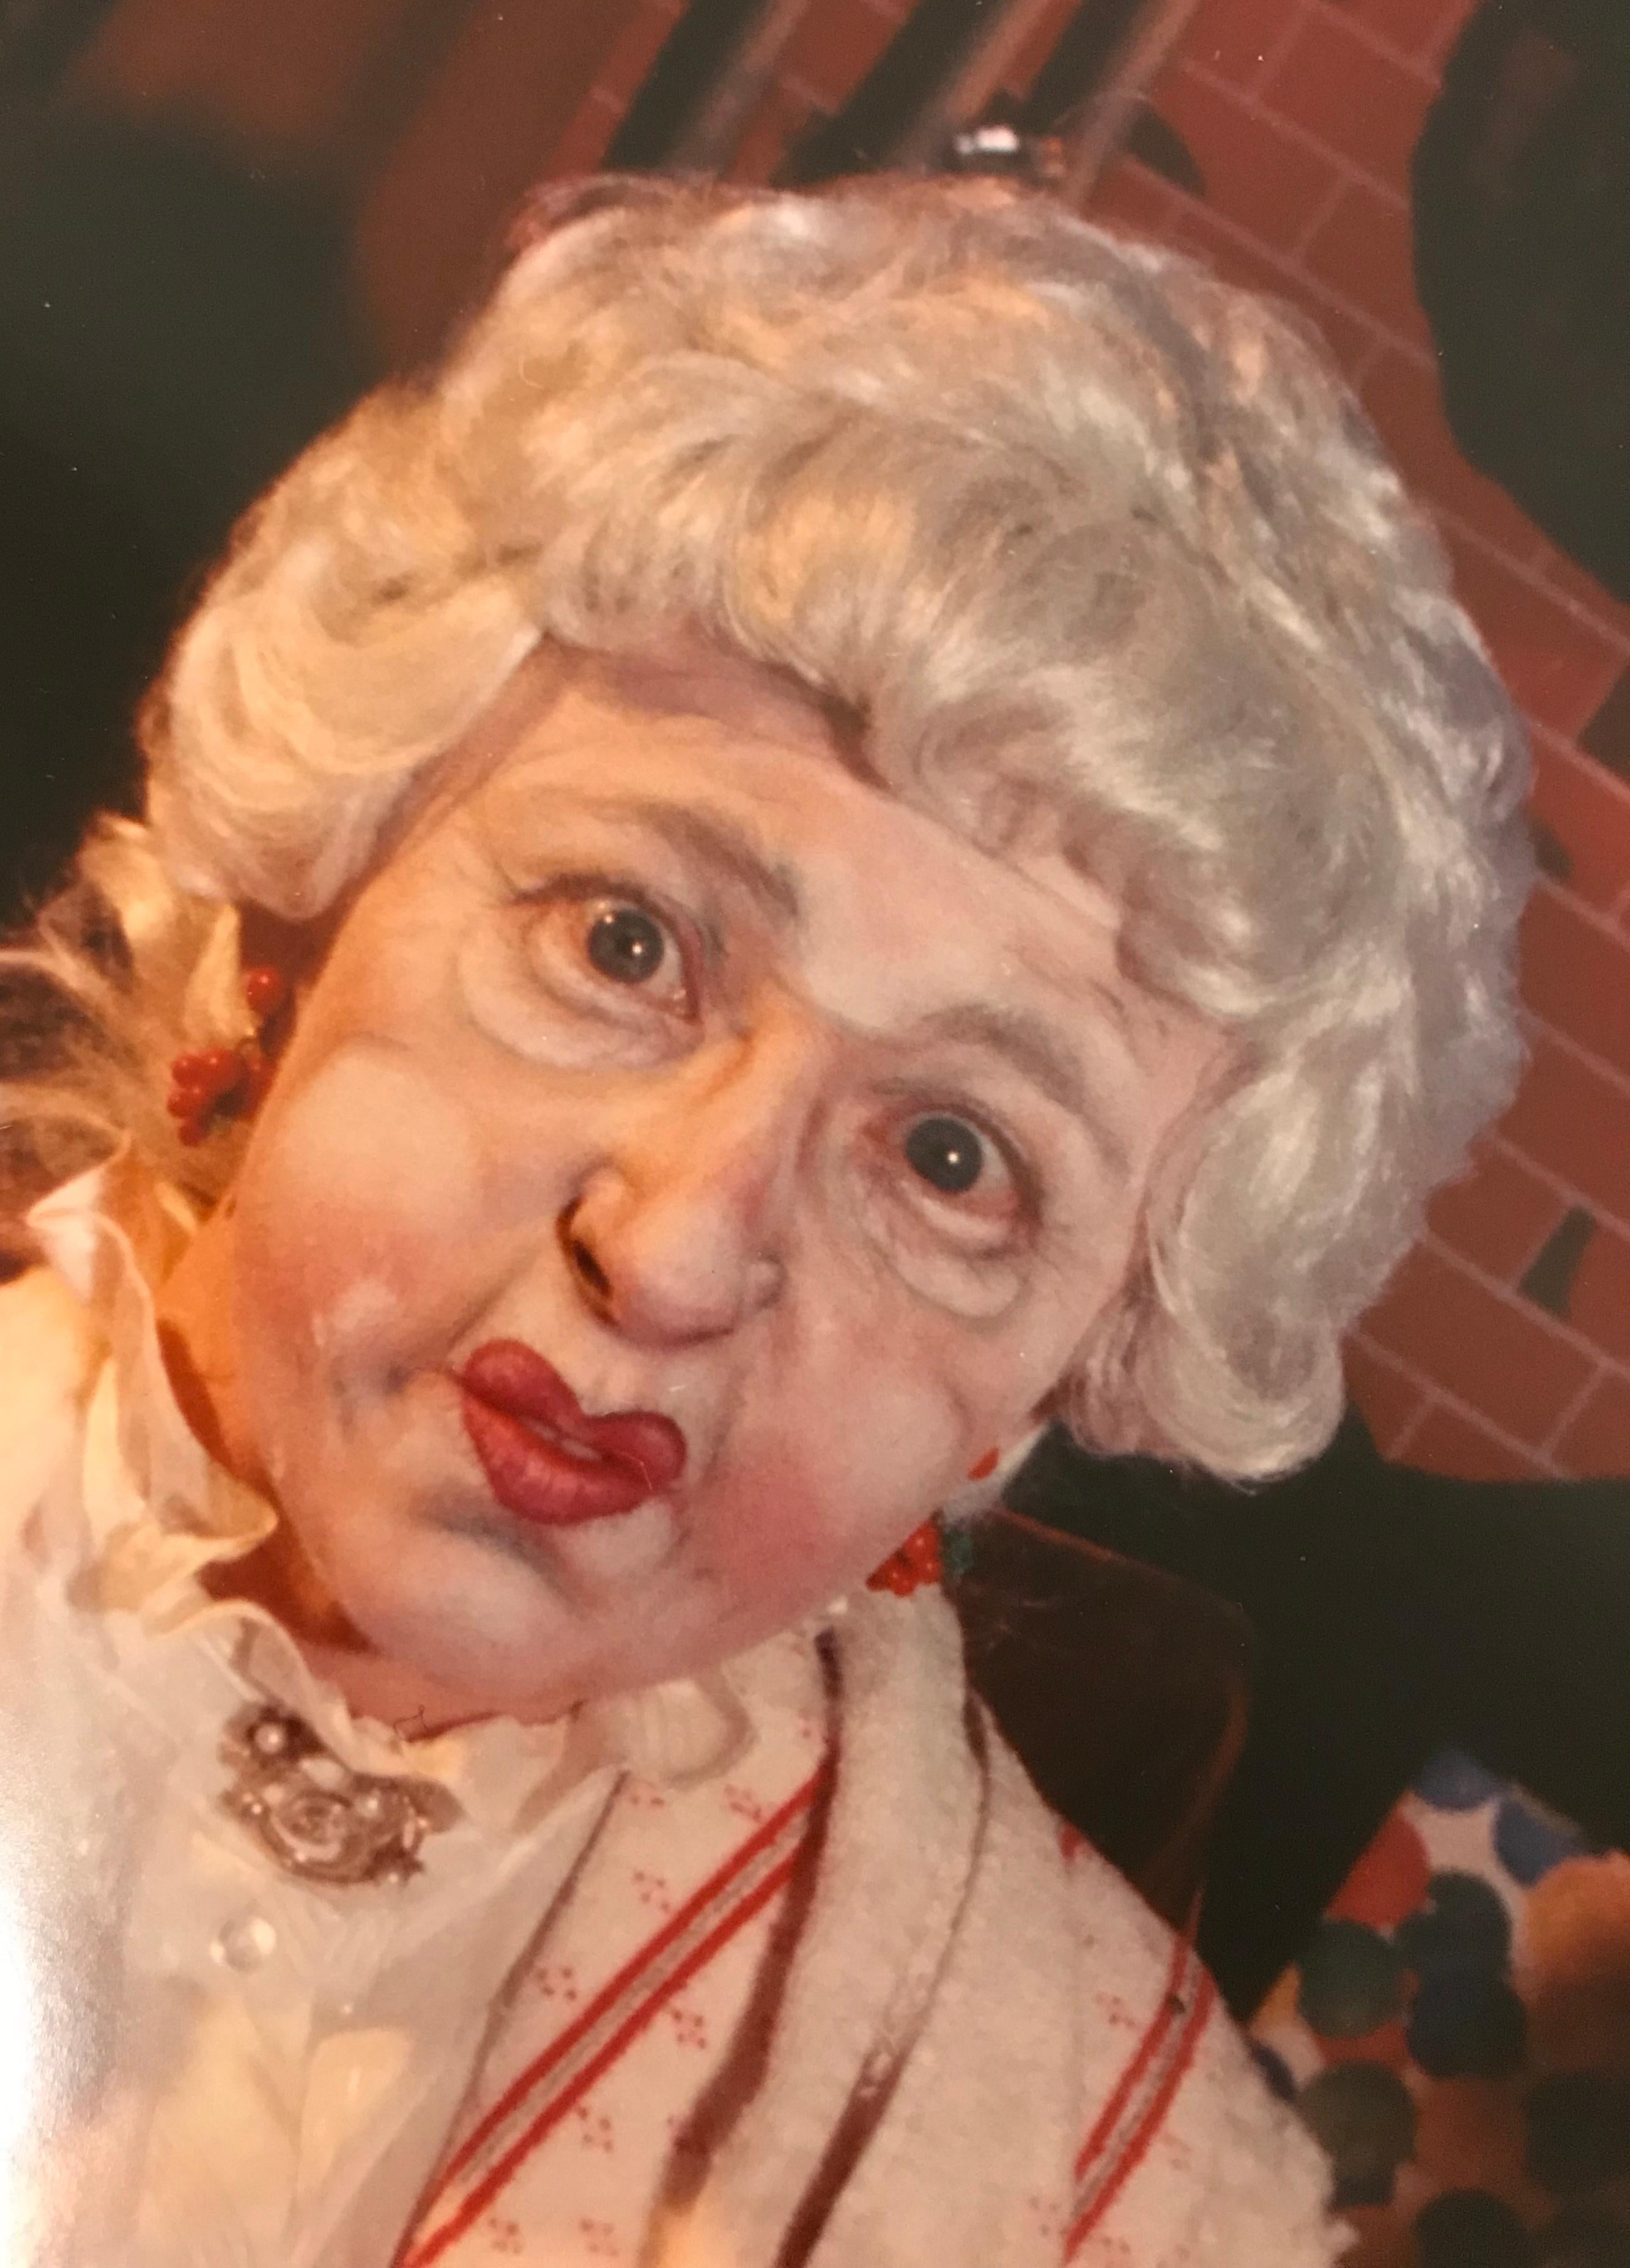 Cindy Sherman's self portrait as Mrs. Claus. Cindy Sherman is a humorous look of feminine ideals projected on women.She is a contemporary master of socially critical photography and is a key figure of the 